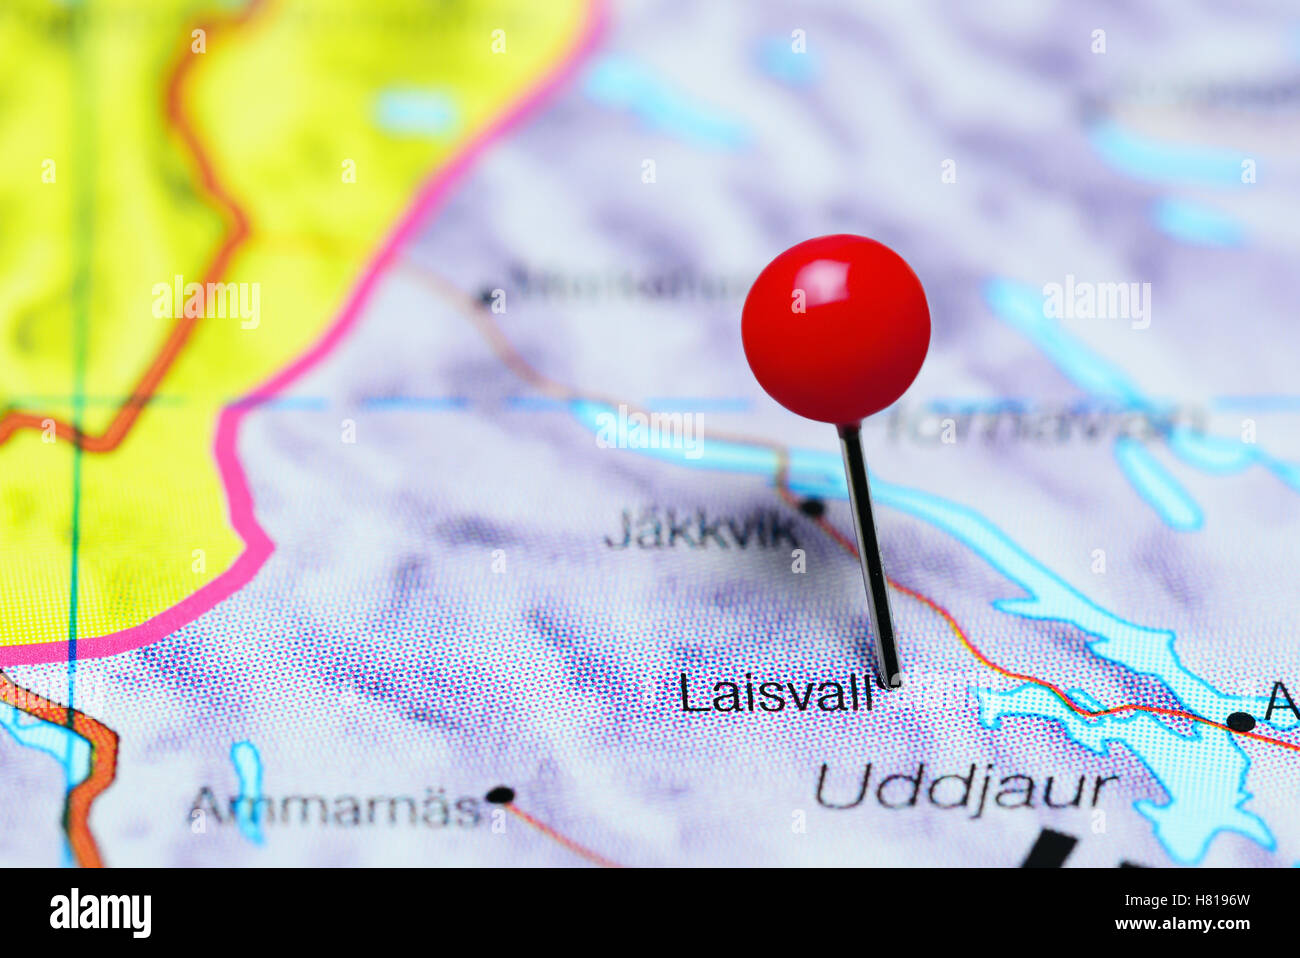 Laisvall pinned on a map of Sweden Stock Photo